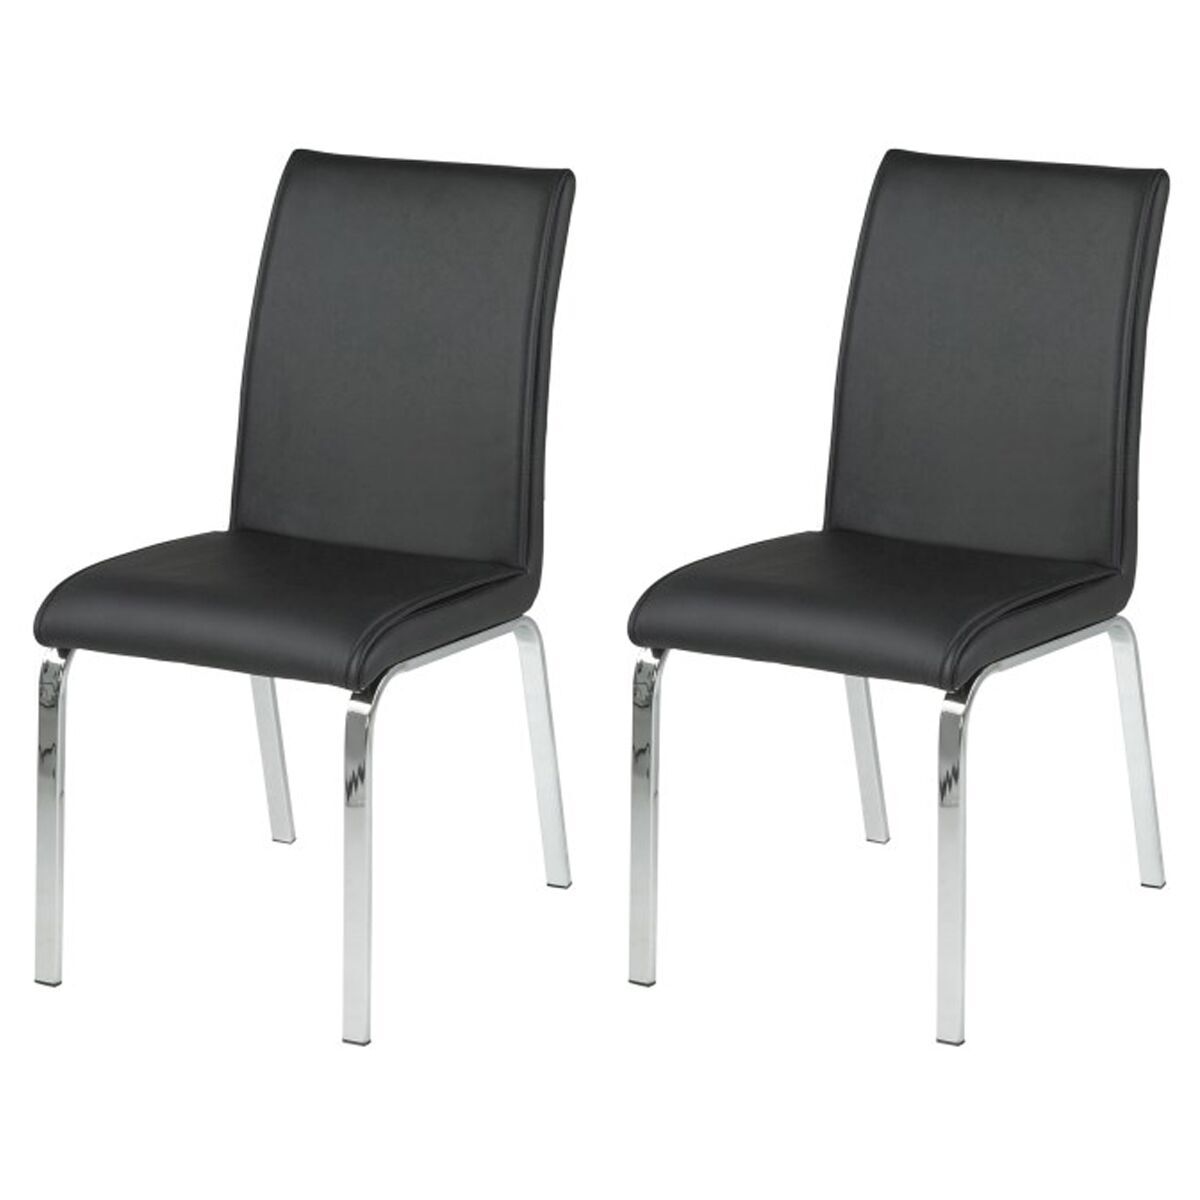 Leonora Black Faux Leather Dining Chairs | Dining Chairs | FADS